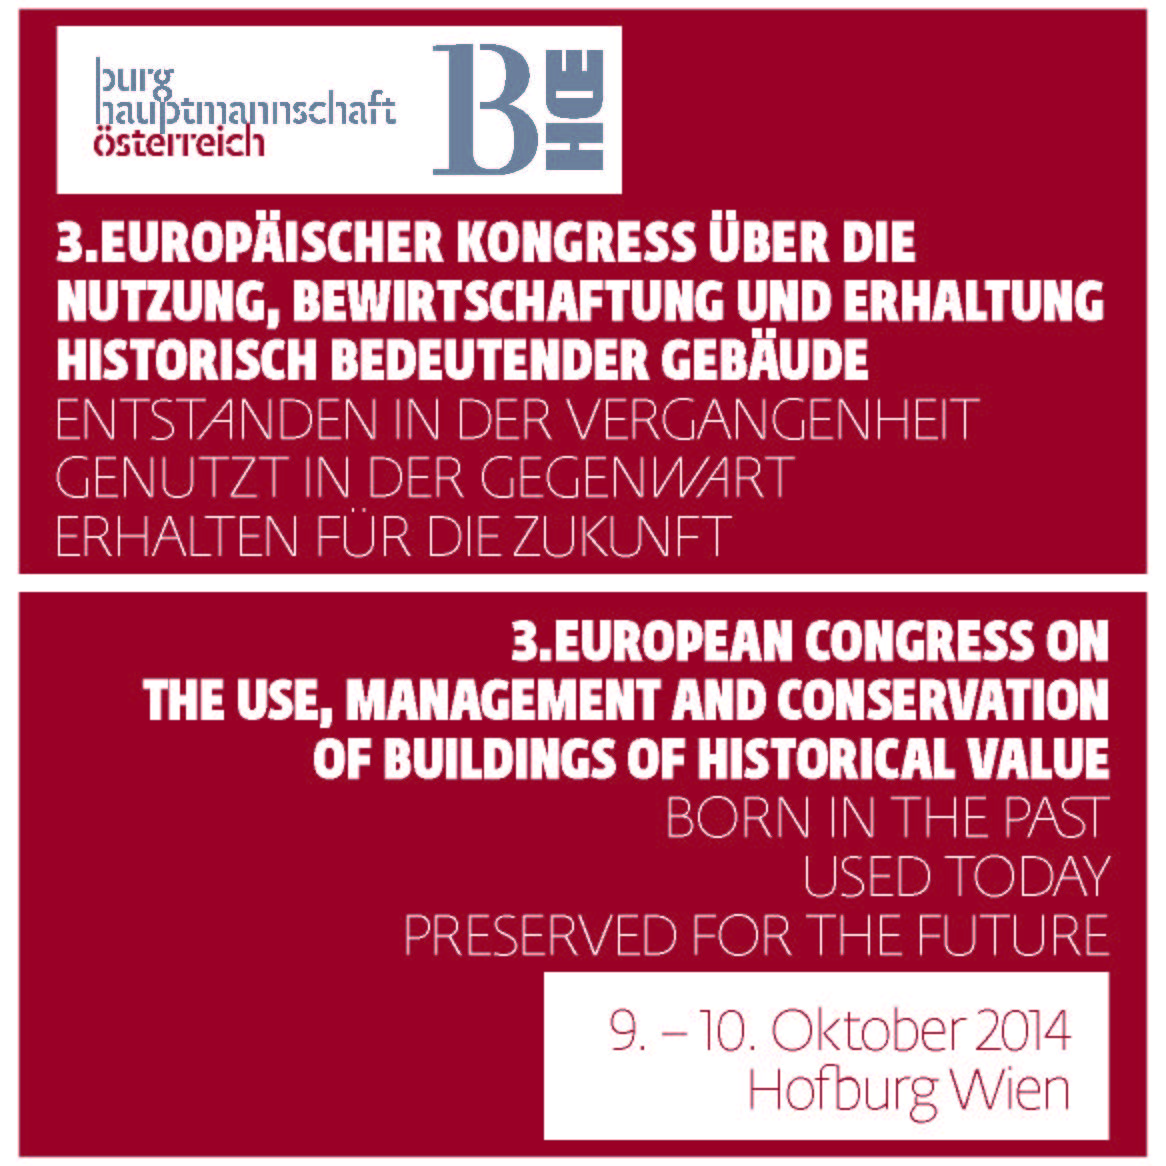 Logo of the event with the text Third European Congress on the Use, management and Conservation of buildings of Historical Value. 9-10 October 2014, Hofburg Wien